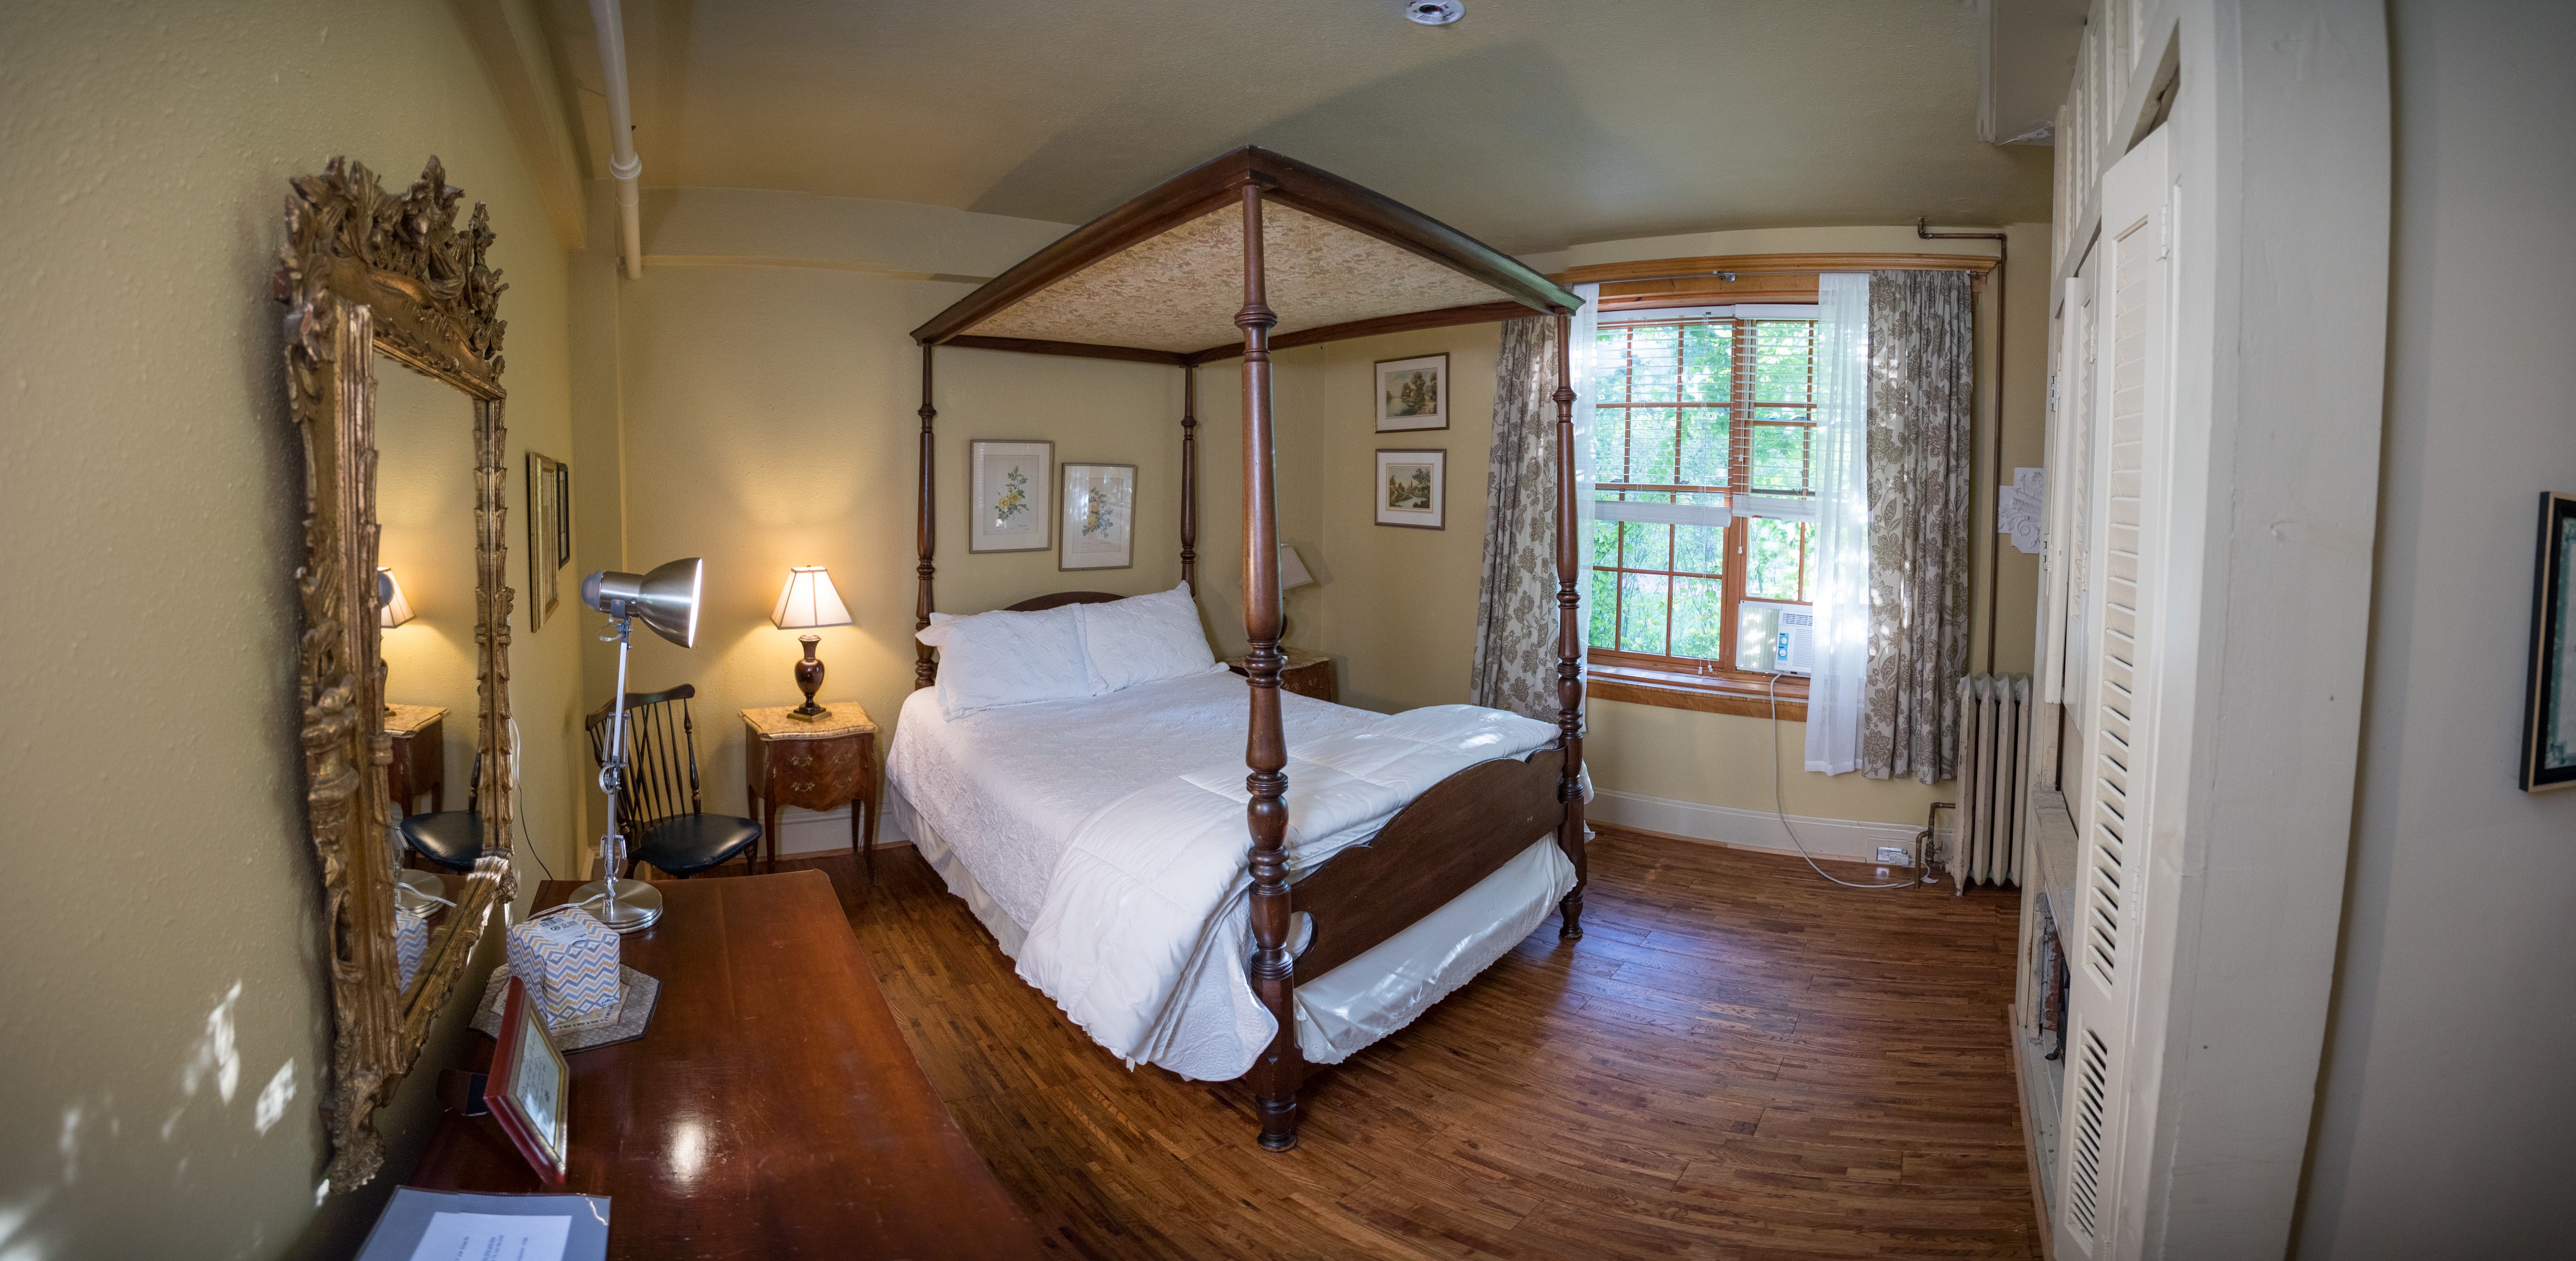 Amelia Earhart bedroom with four post queen bed with canopy